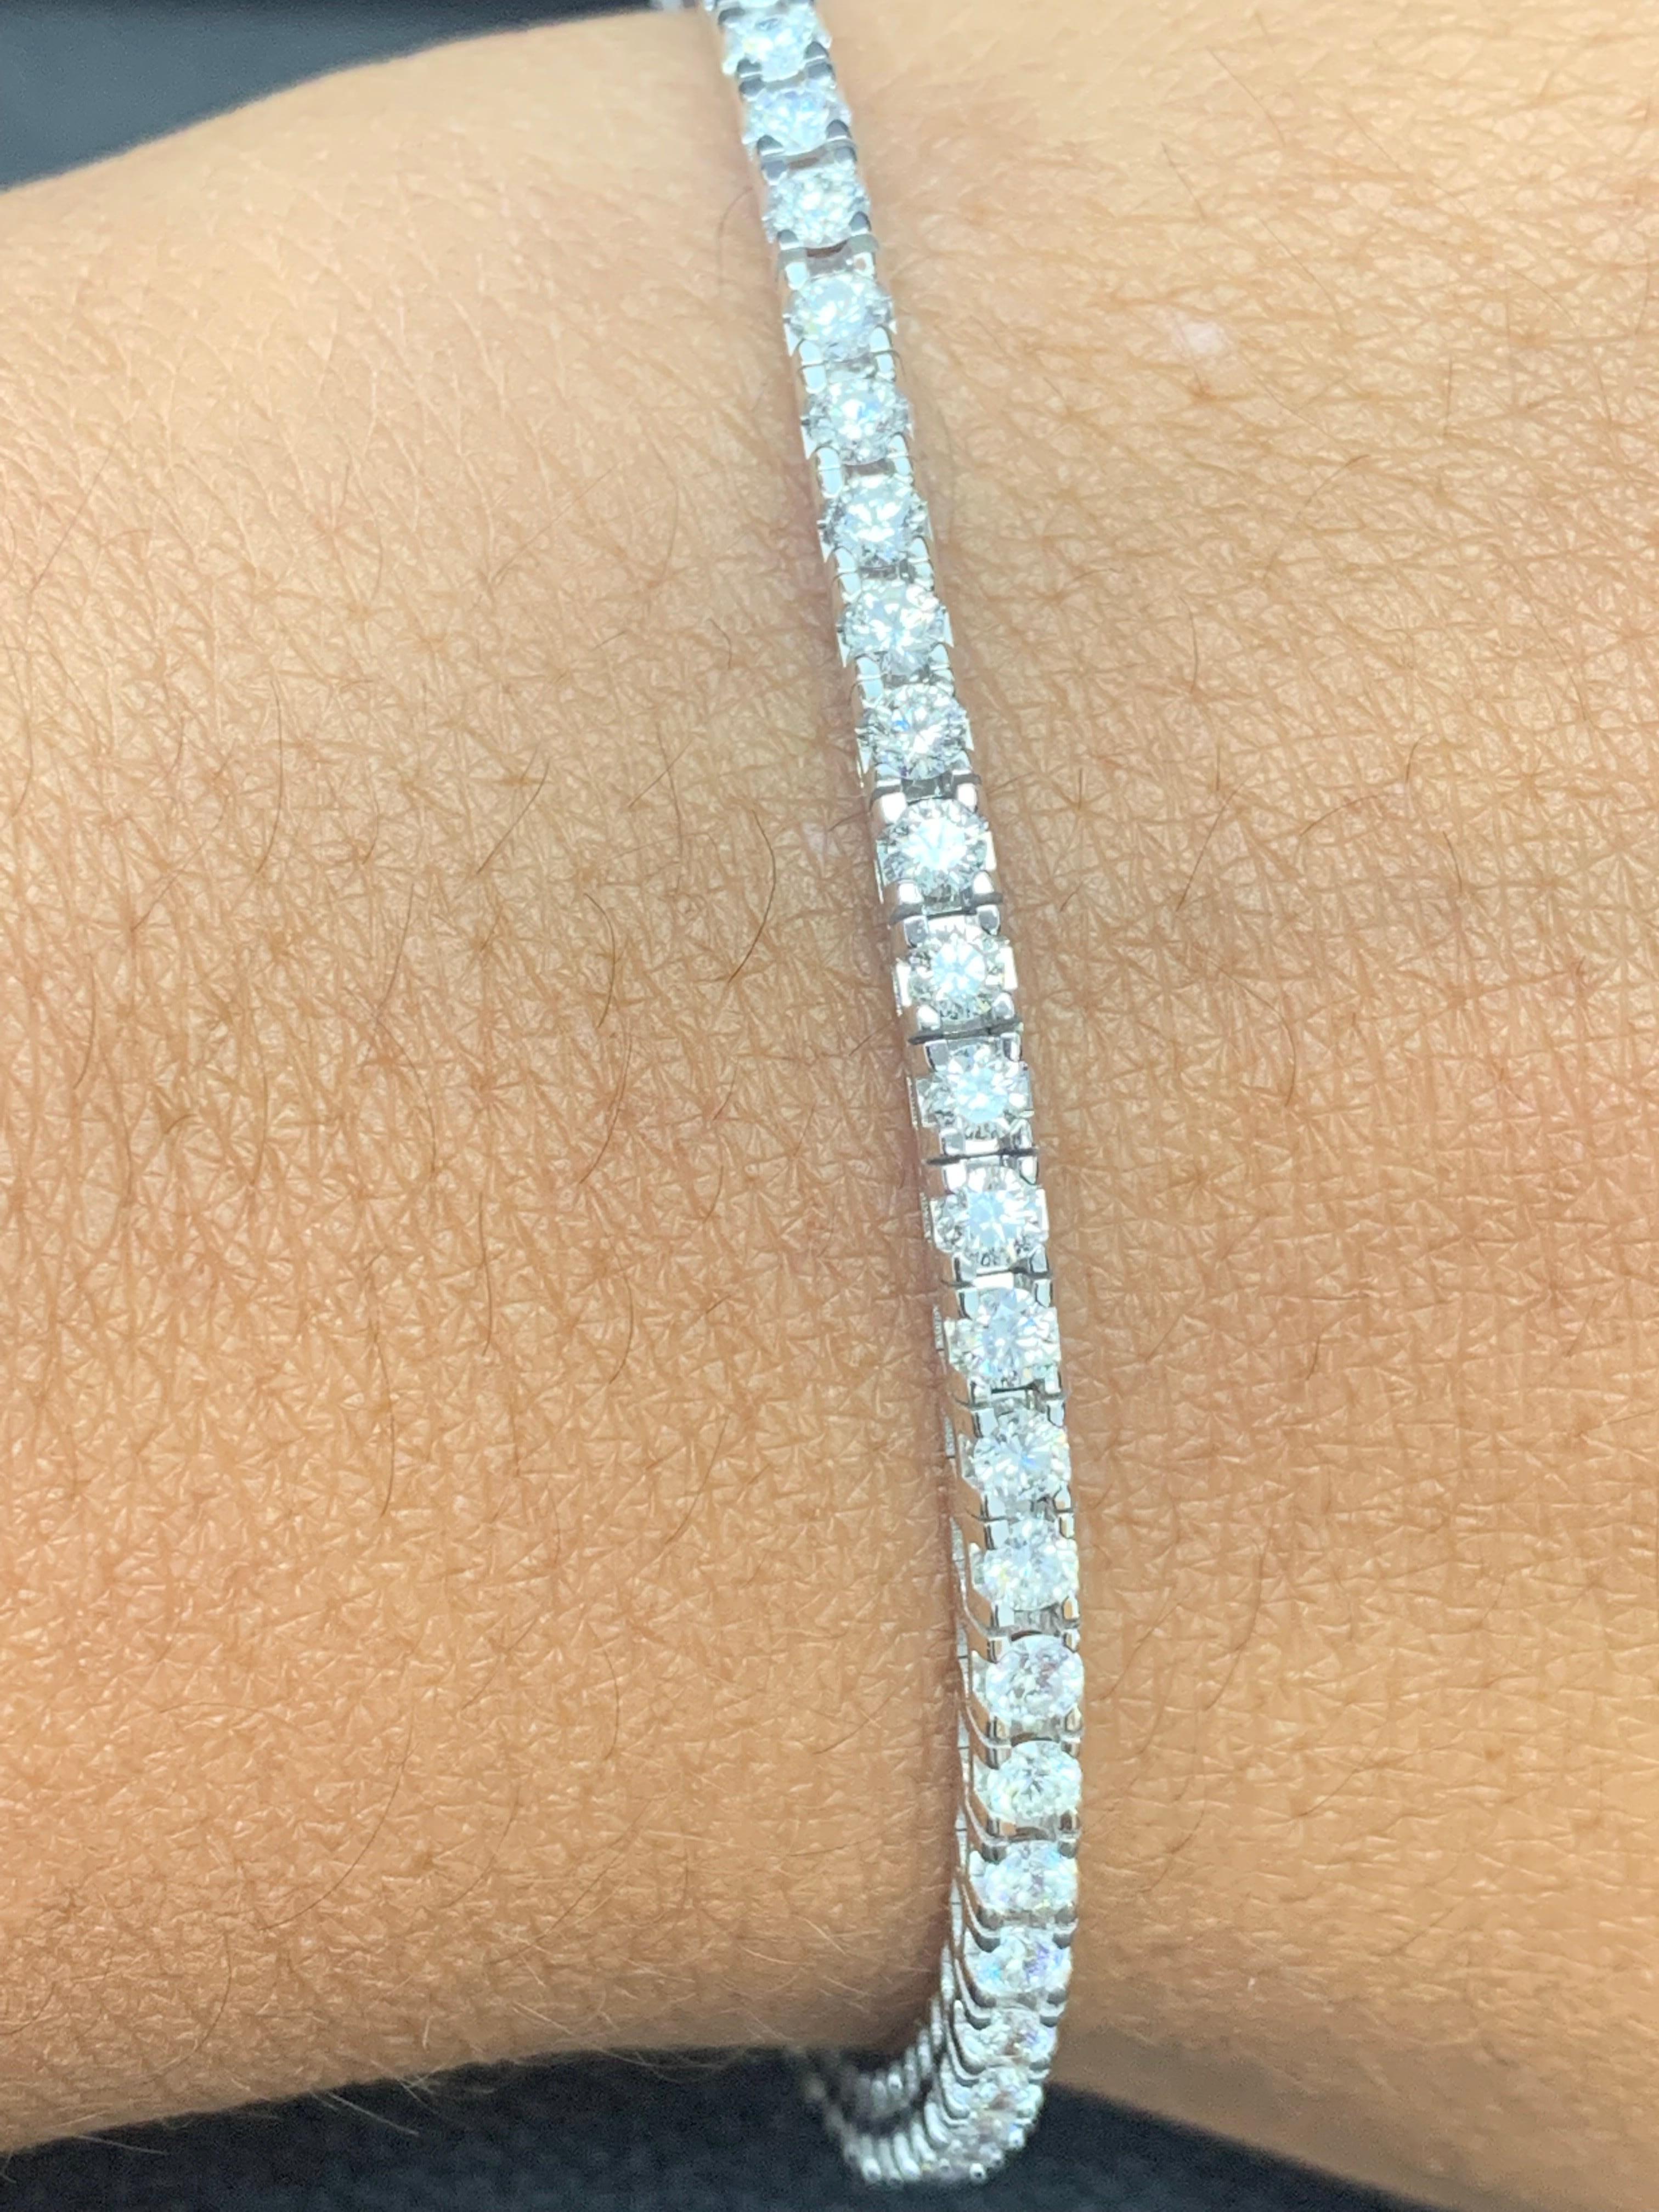 A classic tennis bracelet style showcasing a row of round brilliant diamonds, set in a polished 14k white gold mounting. 65 Diamonds weigh 3.00 carats total and are approximately GH color, SI1 clarity.

Style available in different price ranges.